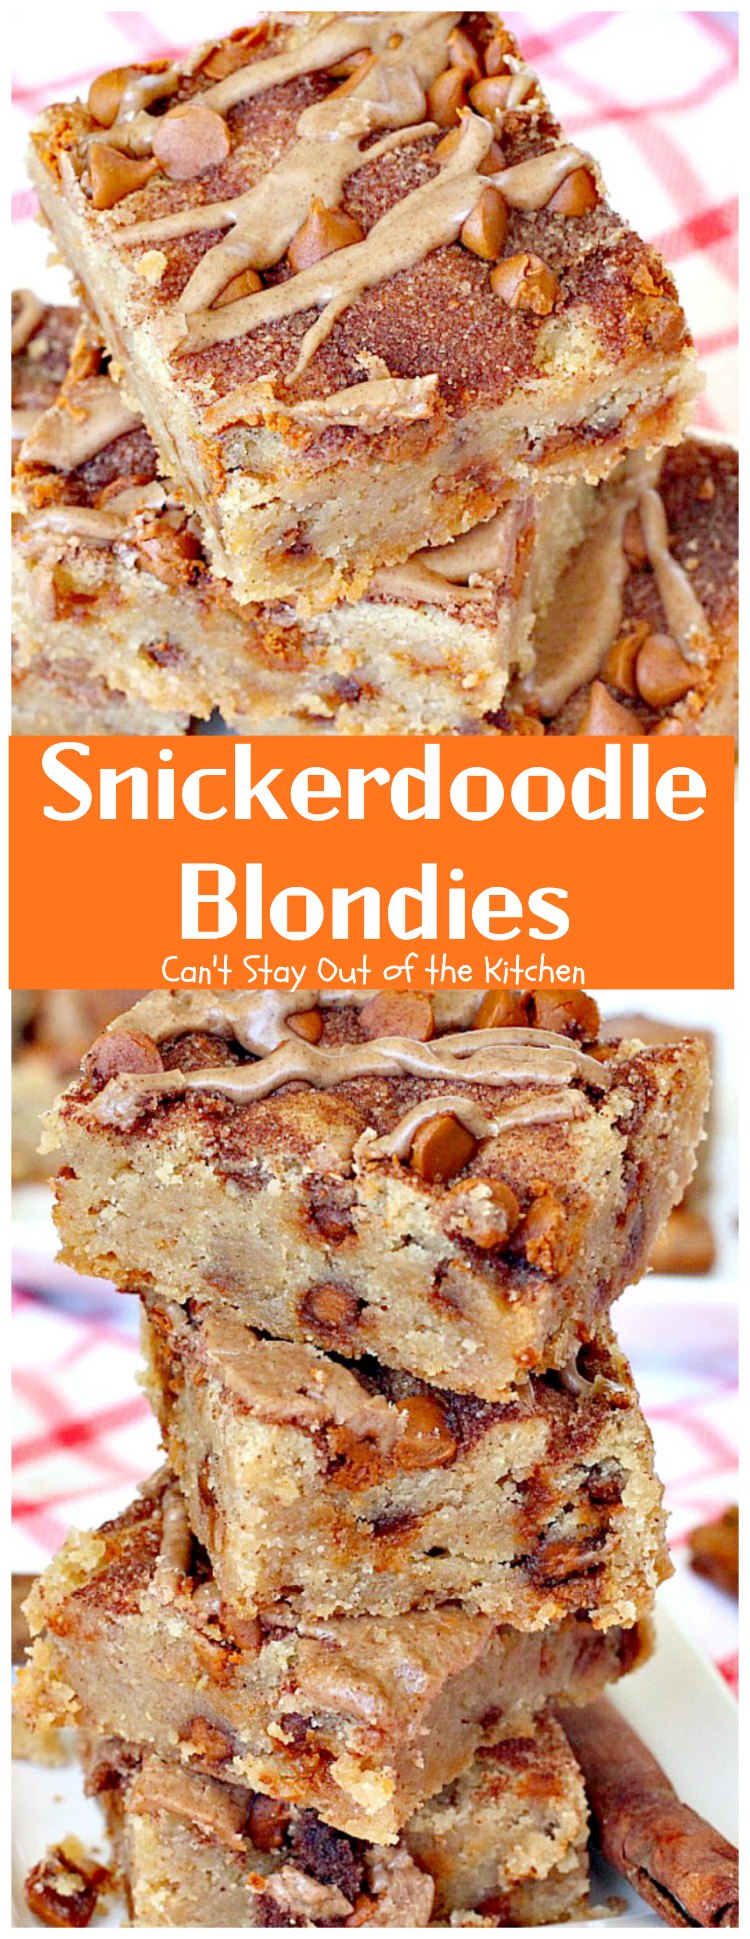 Snickerdoodle Blondies | Can't Stay Out of the Kitchen